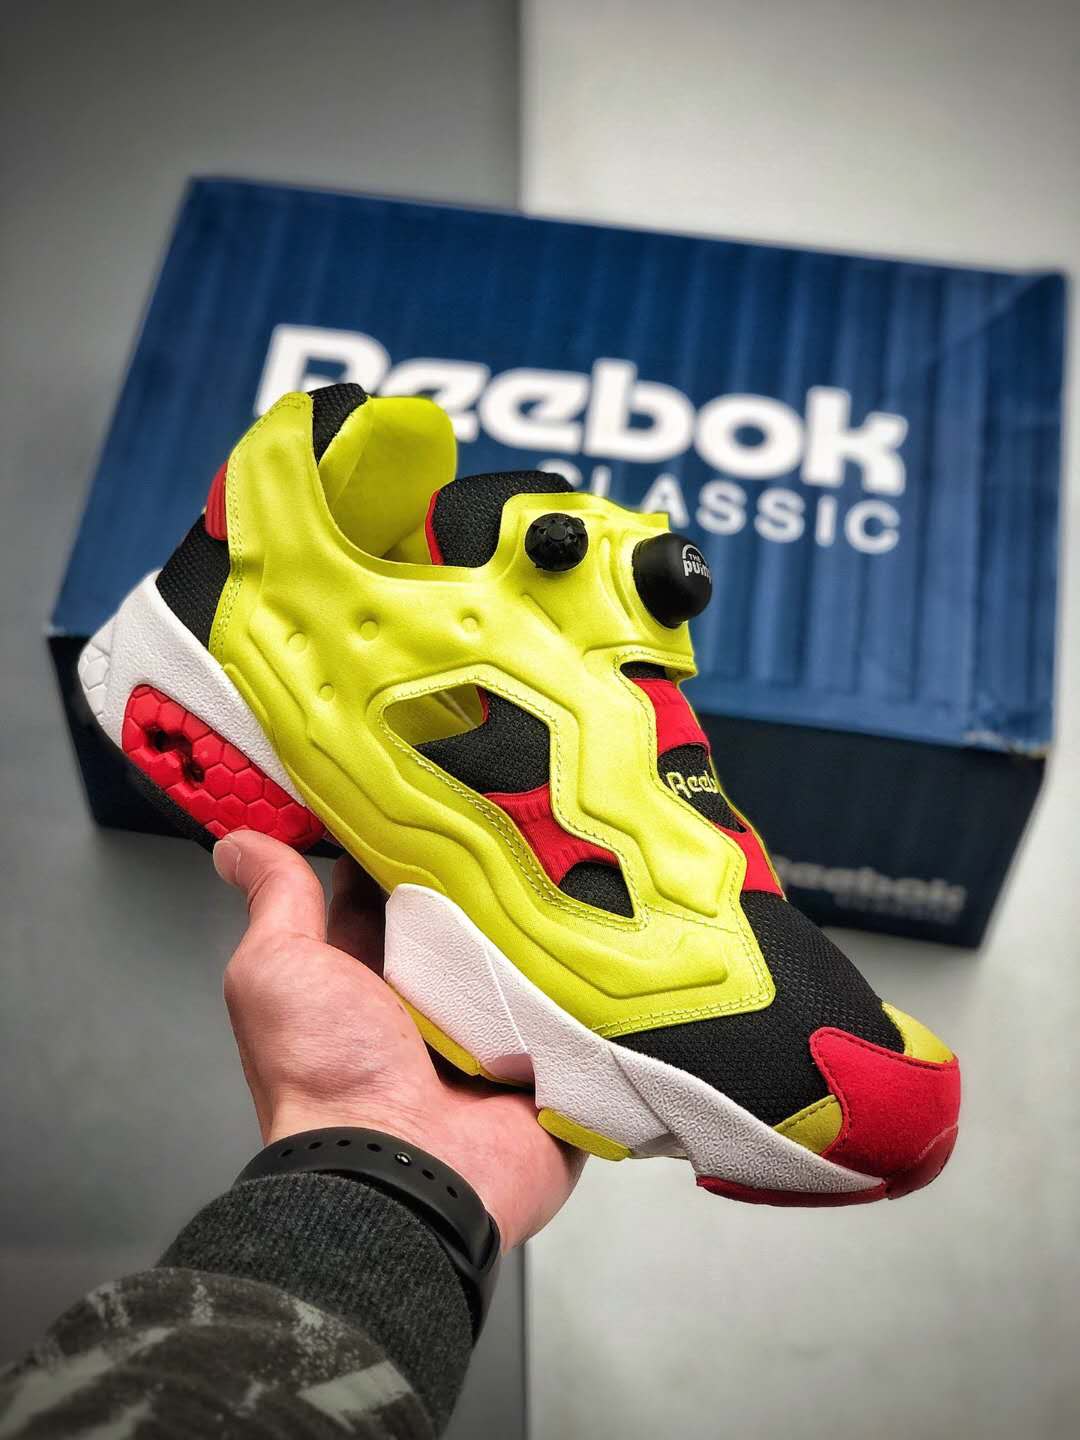 Reebok InstaPump Fury OG Retro 'Citron' 2019 V47514 - Stylish and Airy Athletic Sneakers